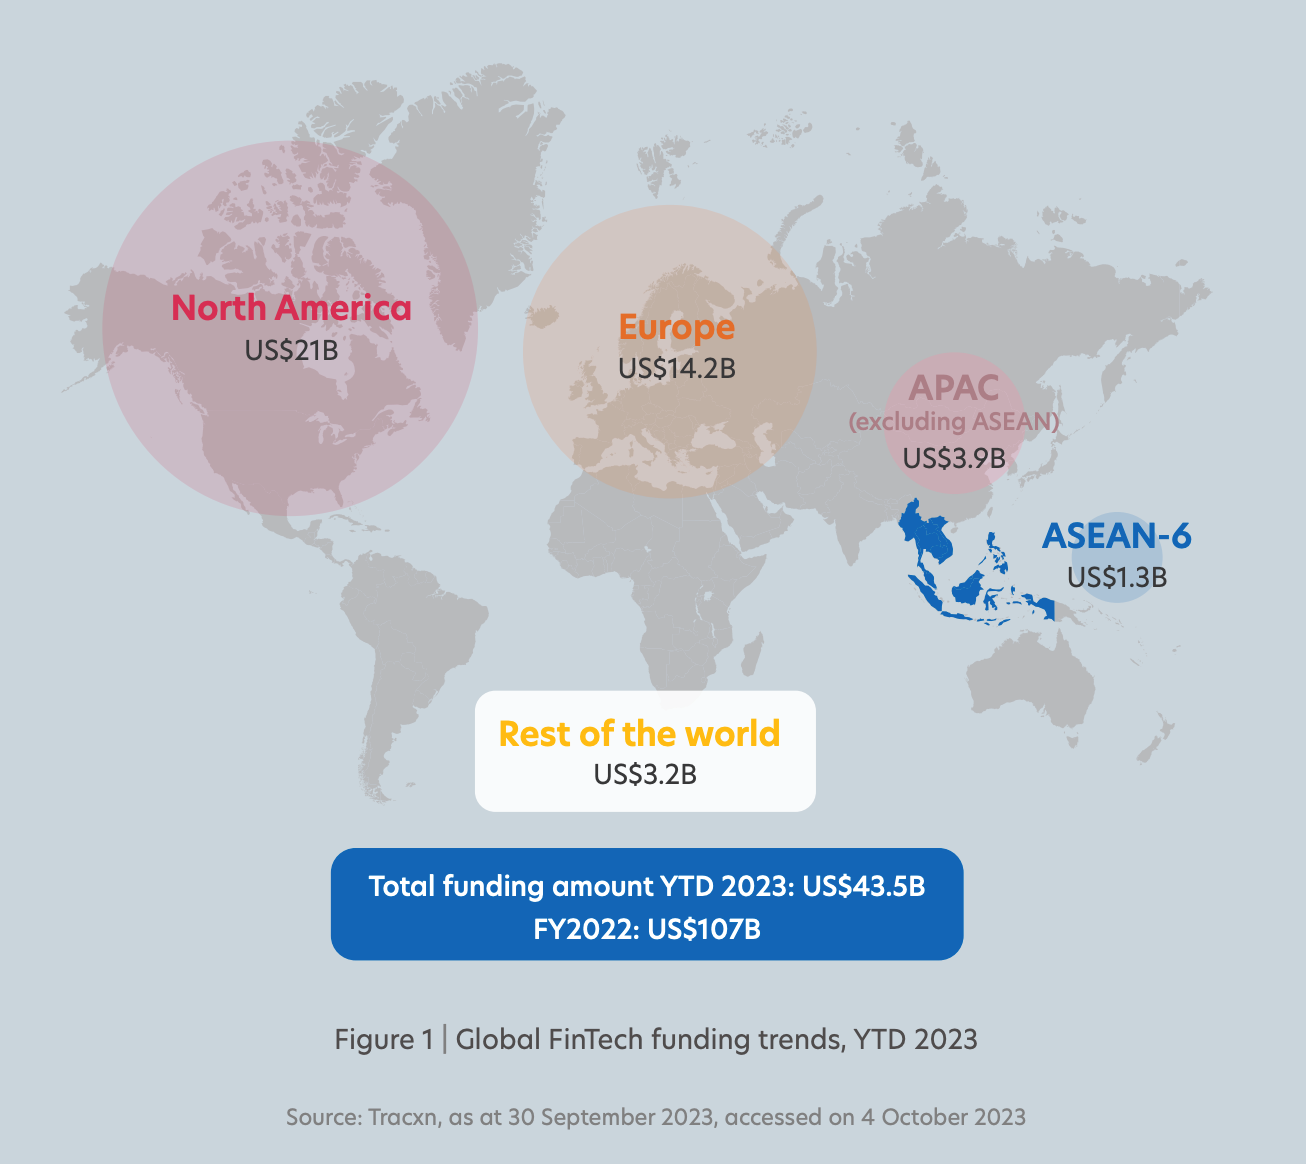 global-finrech-funding-trends-ytd-2023-source-fintech-in-asean-2023-seeding-the-green-transition-uob-pwc-singapore-and-the-singapore-fintech-association-sfa-nov-2023.png